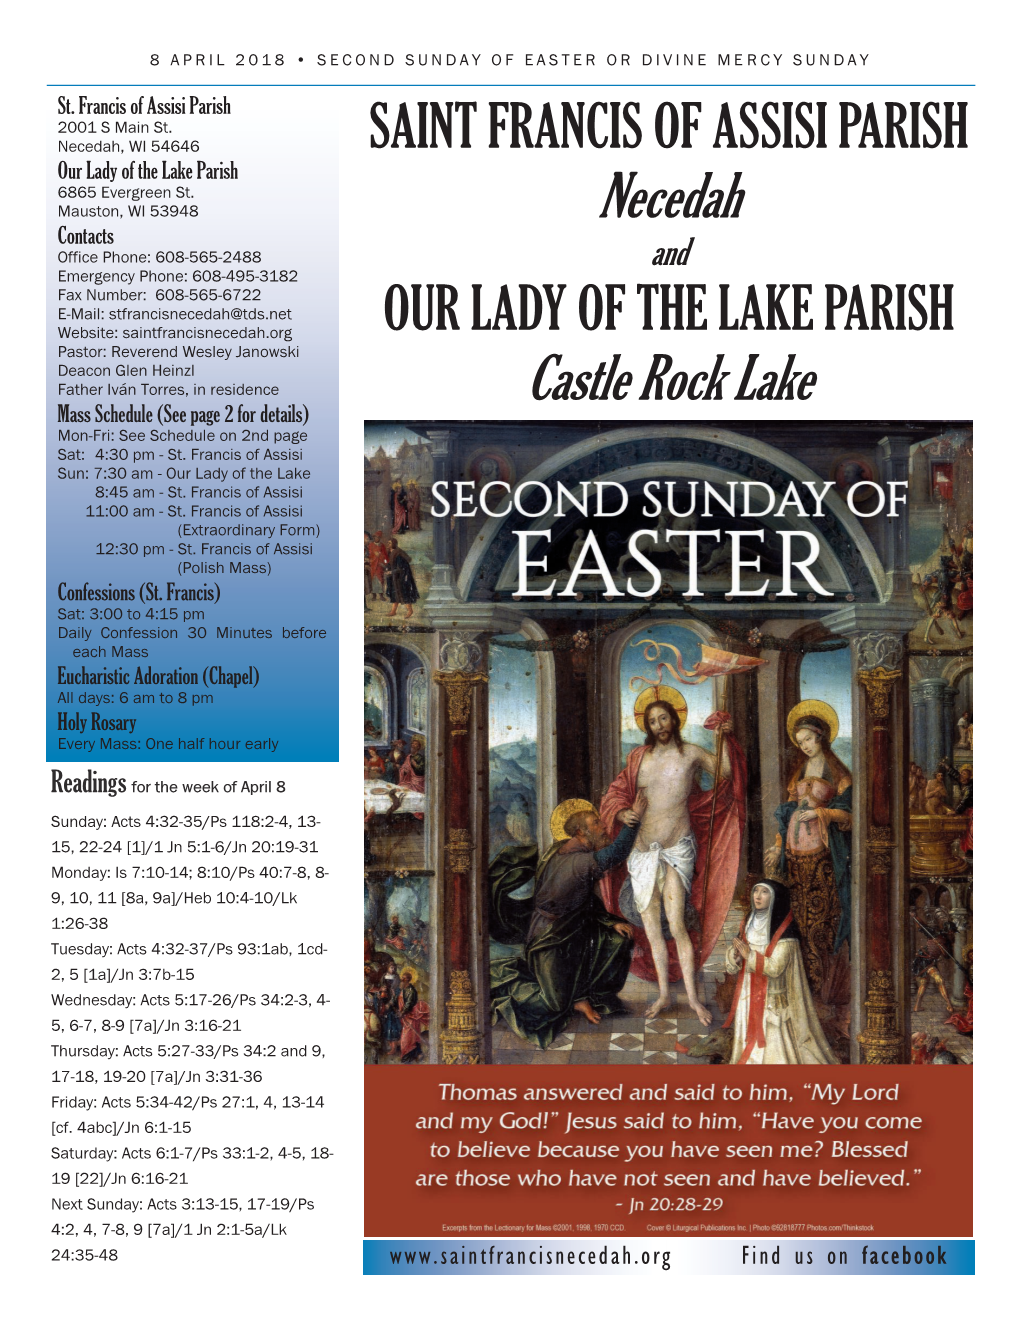 SAINT FRANCIS of ASSISI PARISH Necedah OUR LADY of the LAKE